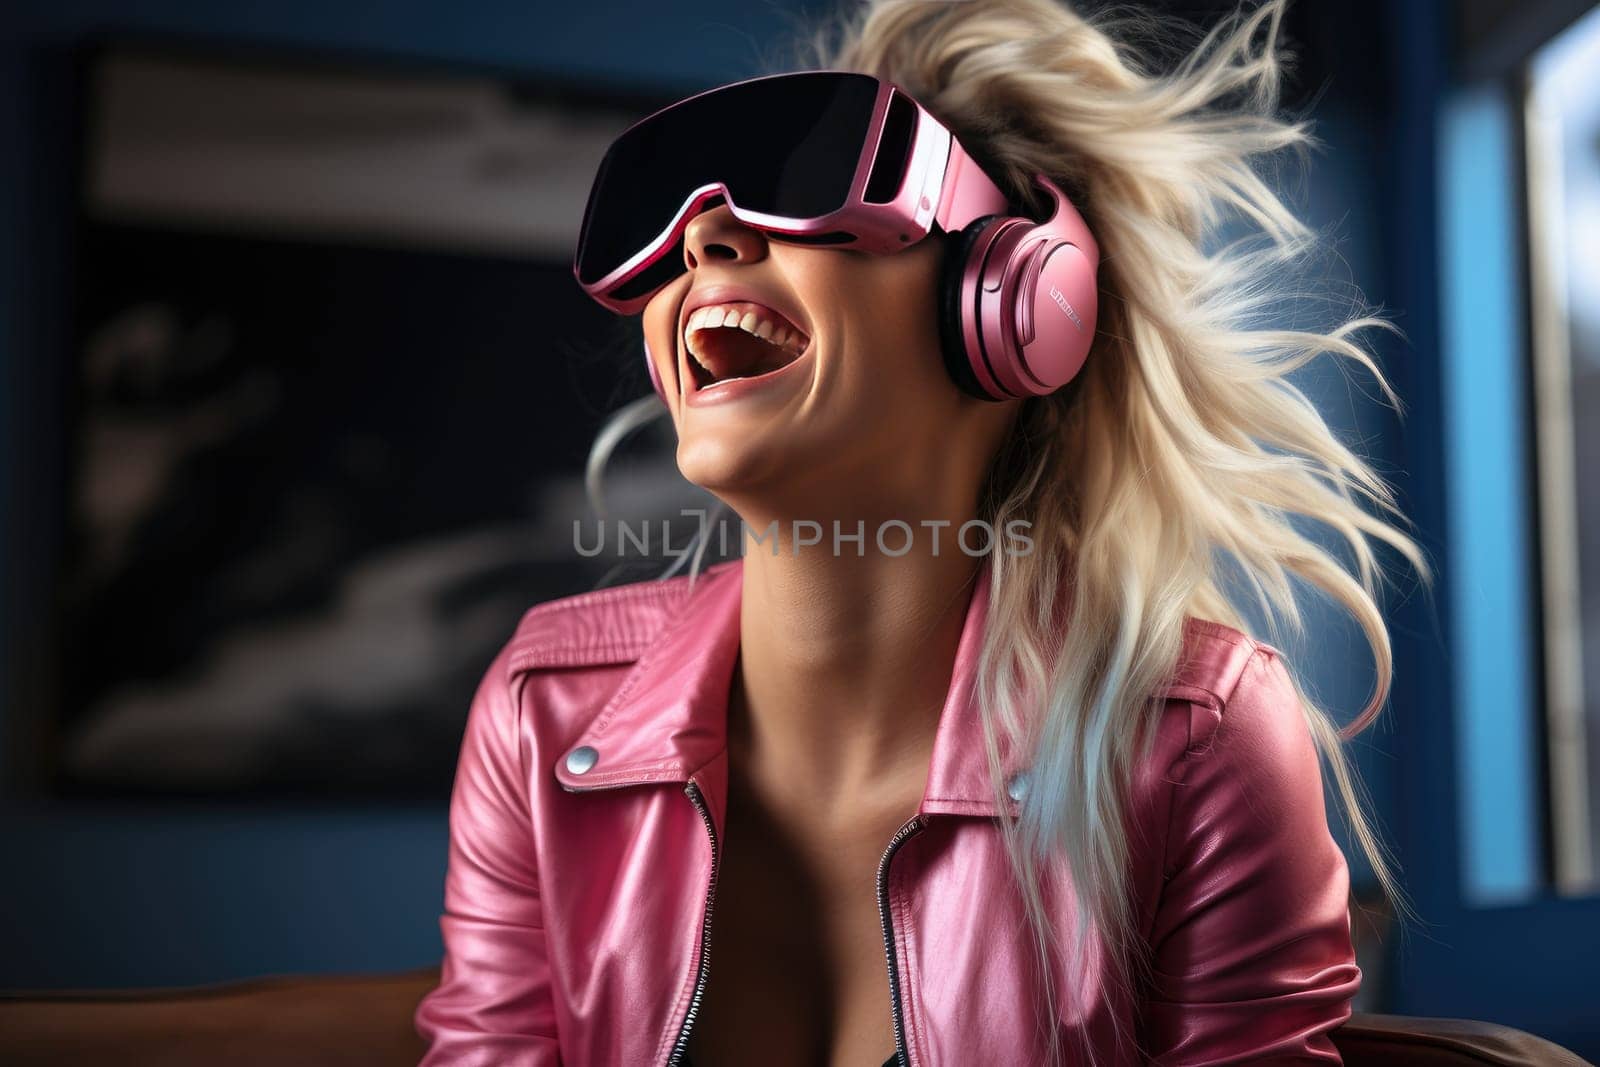 Virtual reality concept with electronic amplification headset and woman by Yurich32